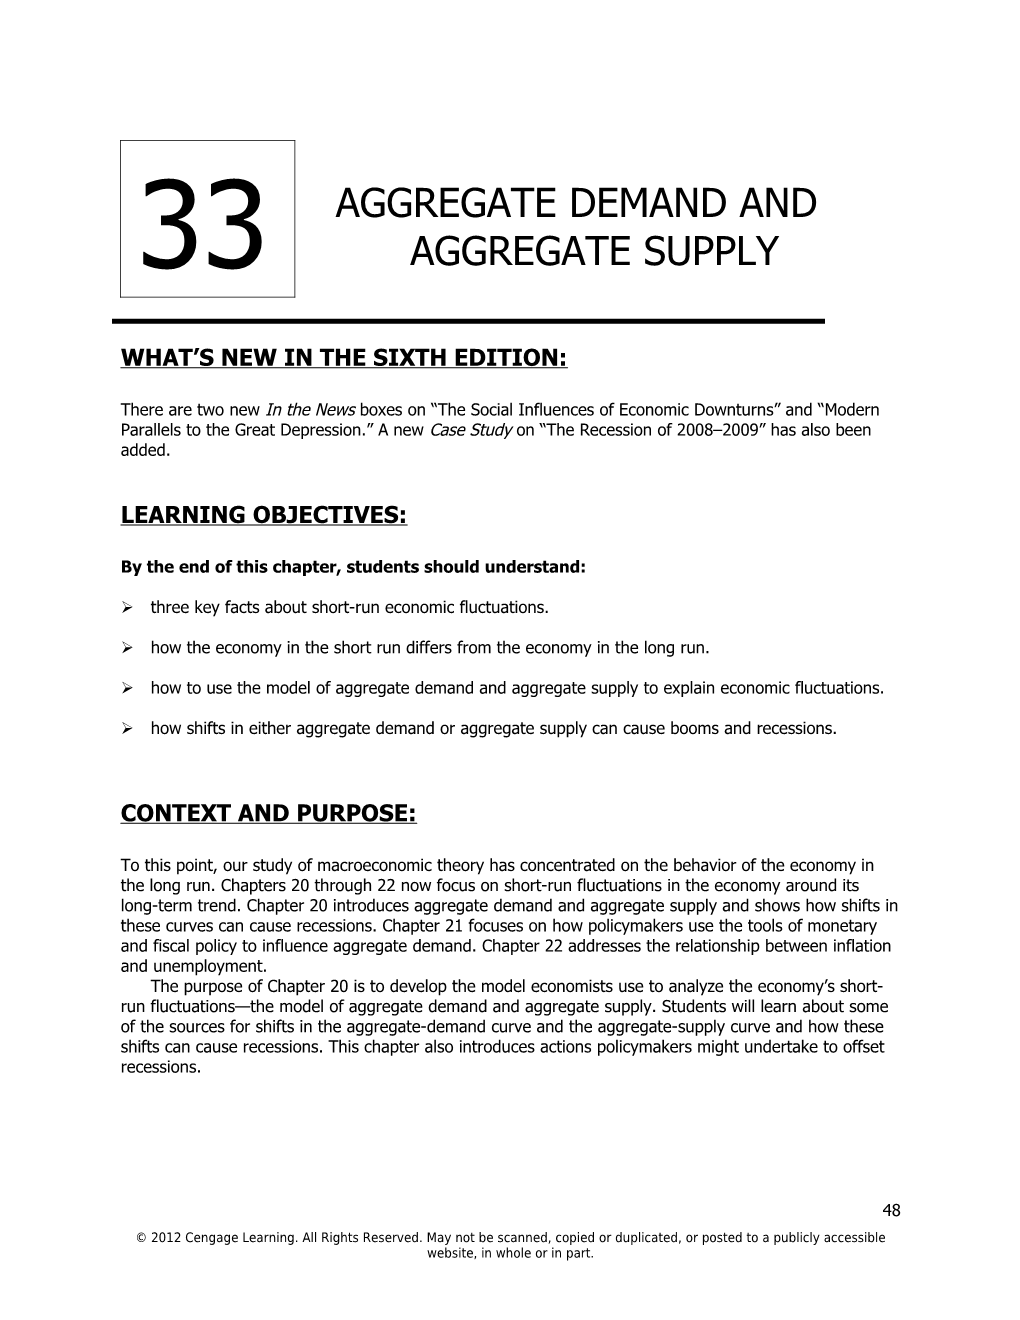 Chapter 33/Aggregate Demand and Aggregate Supply 1